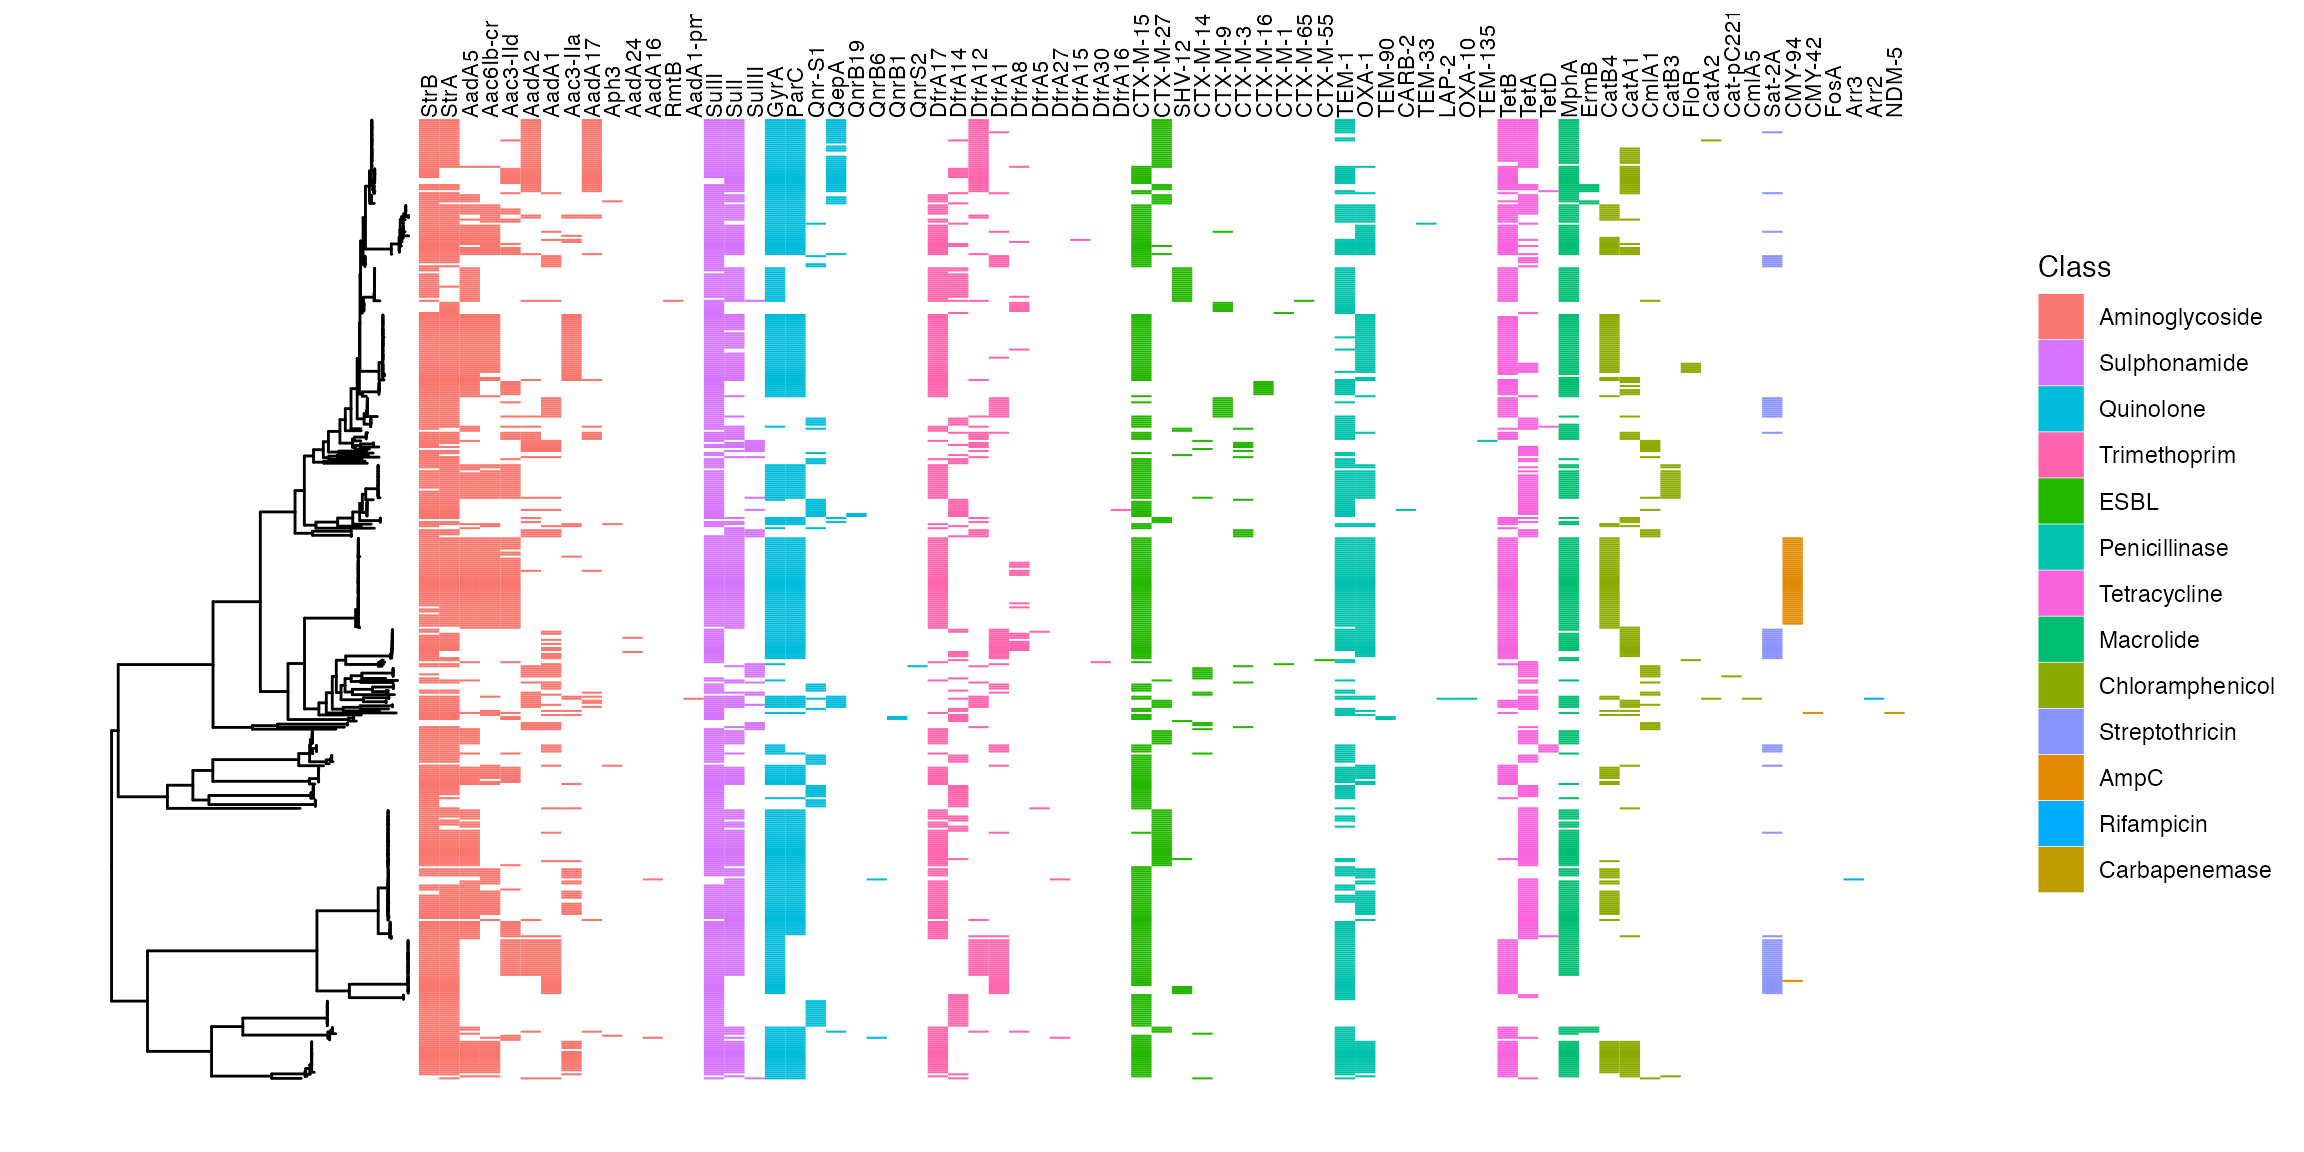 AMR determinants mapped back to phylogeny